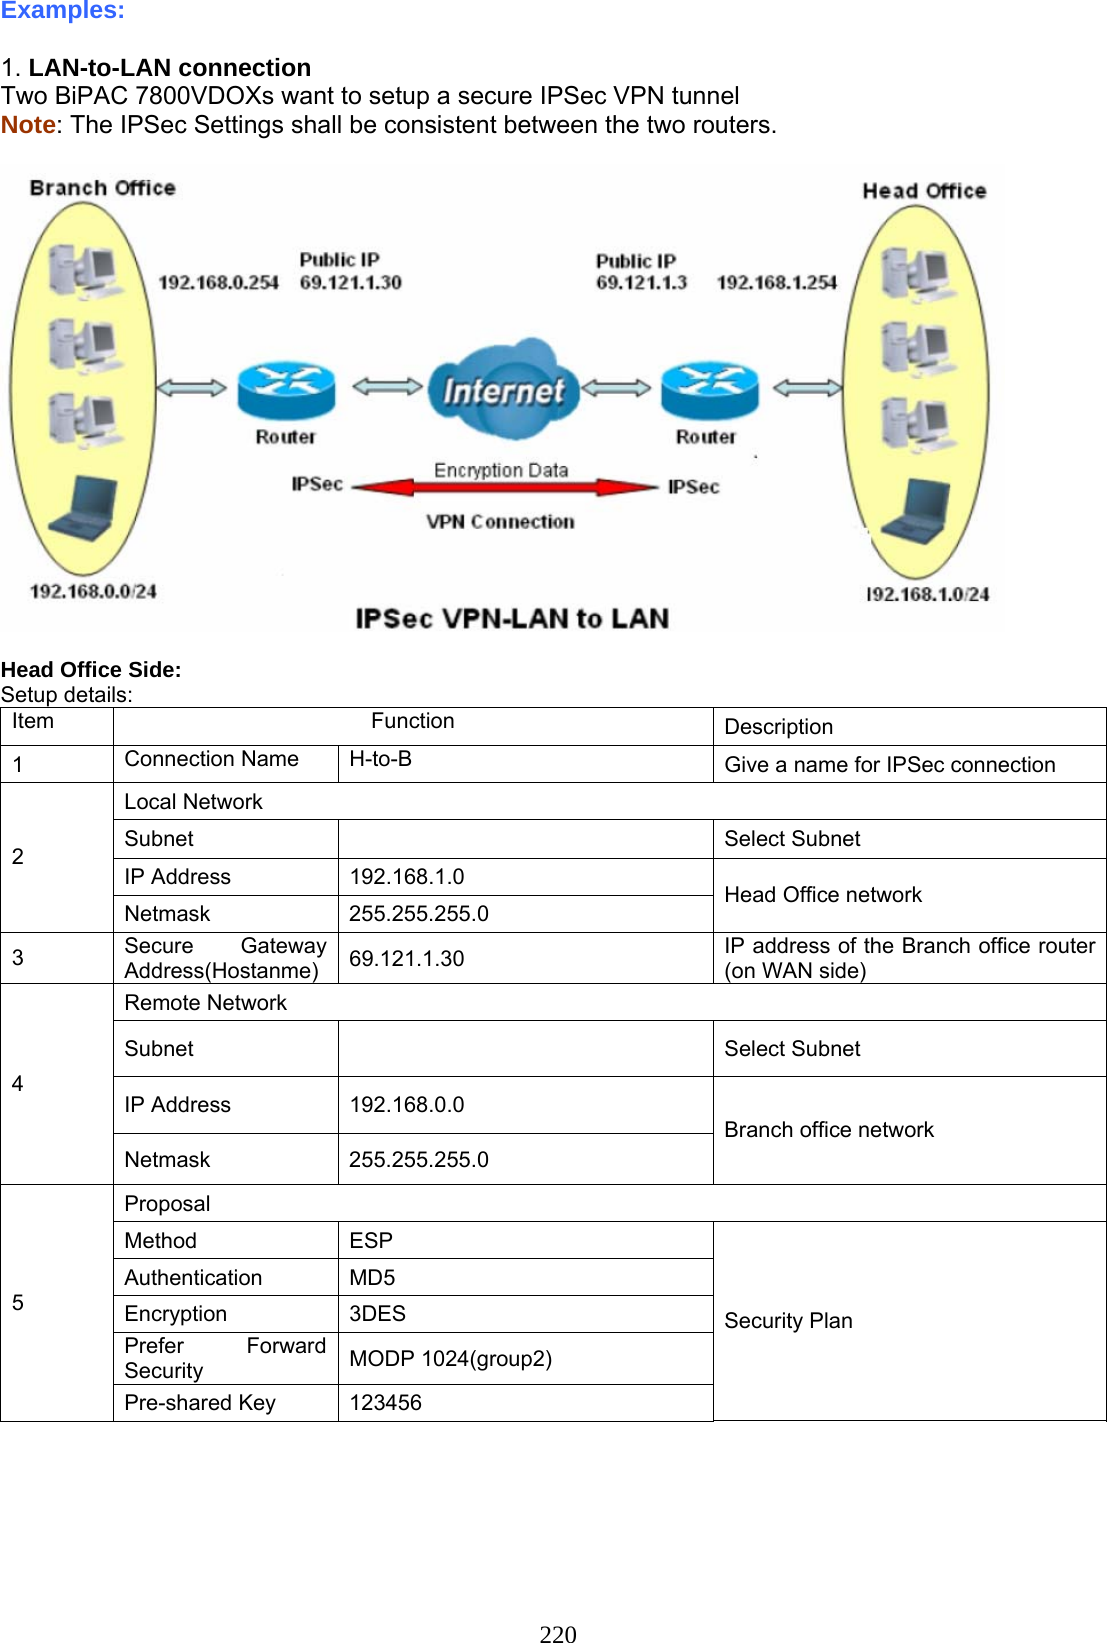 220 Examples:   1. LAN-to-LAN connection Two BiPAC 7800VDOXs want to setup a secure IPSec VPN tunnel  Note: The IPSec Settings shall be consistent between the two routers.    Head Office Side: Setup details: Item Function Description 1  Connection Name  H-to-B  Give a name for IPSec connection Local Network Subnet   Select Subnet  IP Address  192.168.1.0 2 Netmask 255.255.255.0  Head Office network 3  Secure Gateway Address(Hostanme)  69.121.1.30  IP address of the Branch office router (on WAN side) Remote Network Subnet   Select Subnet IP Address  192.168.0.0 4 Netmask 255.255.255.0 Branch office network Proposal Method   ESP Authentication MD5 Encryption   3DES Prefer Forward Security   MODP 1024(group2) 5 Pre-shared Key  123456 Security Plan 